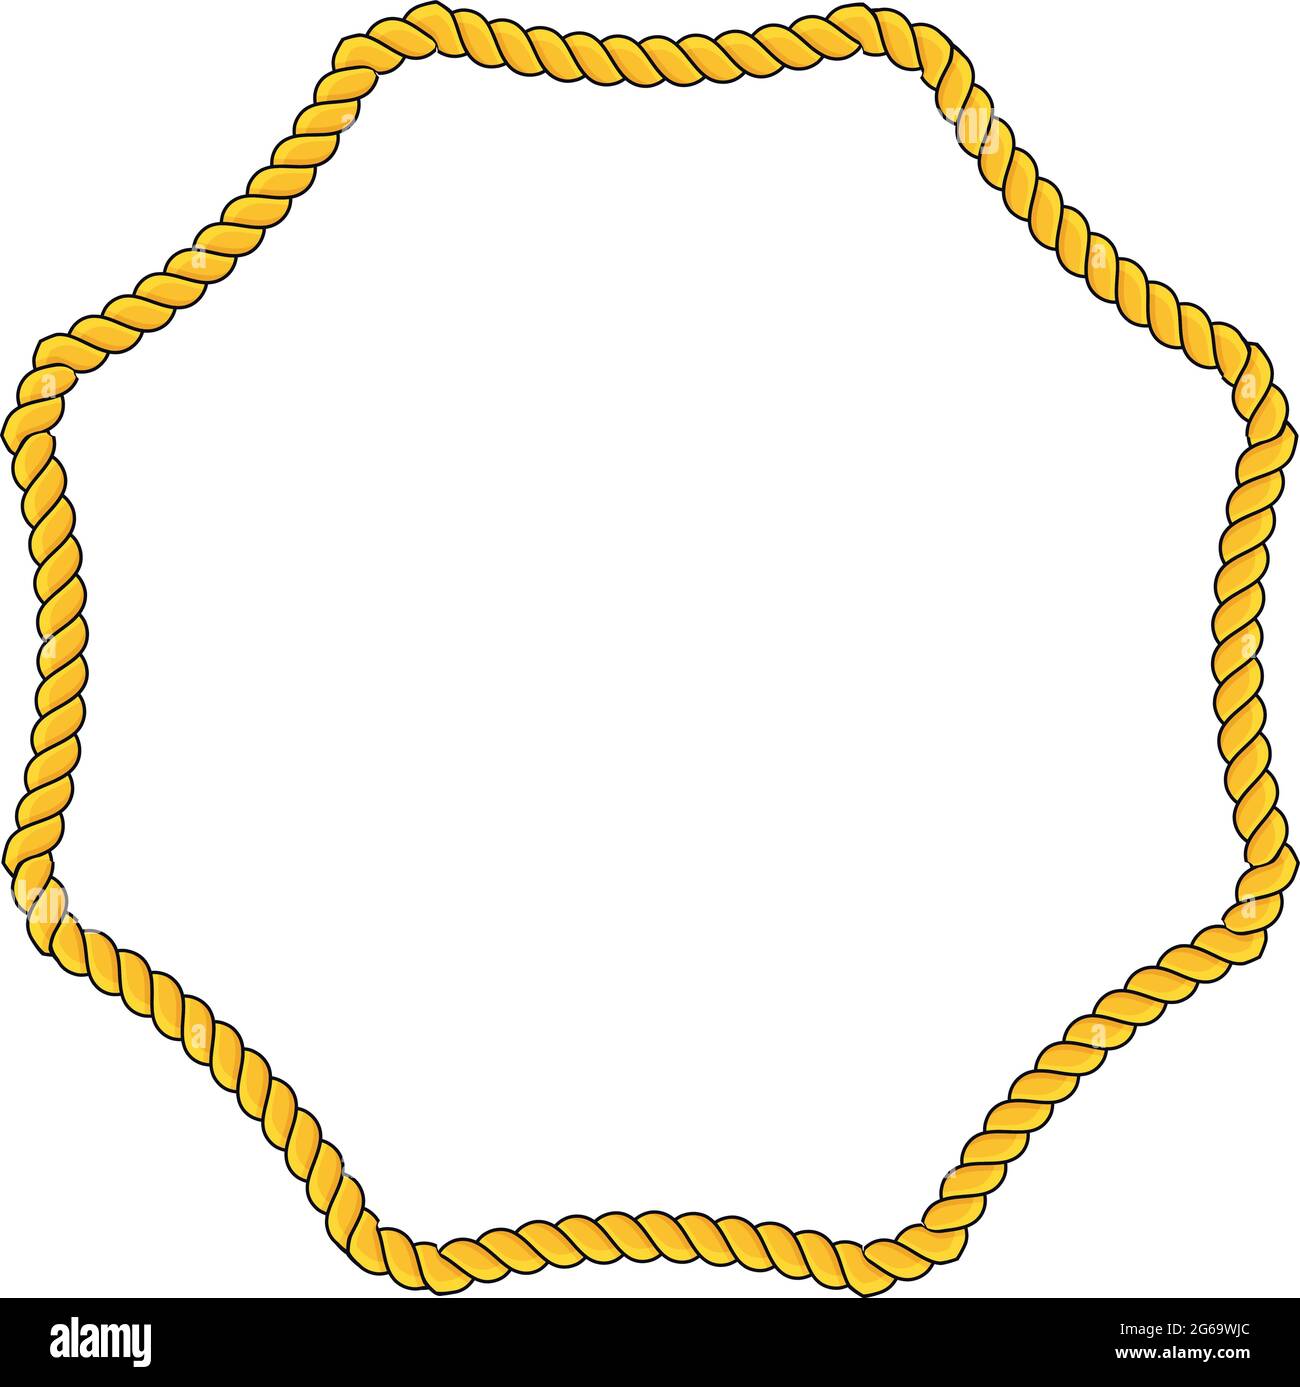 Collection of round outline decorative rope border frames Stock Vector